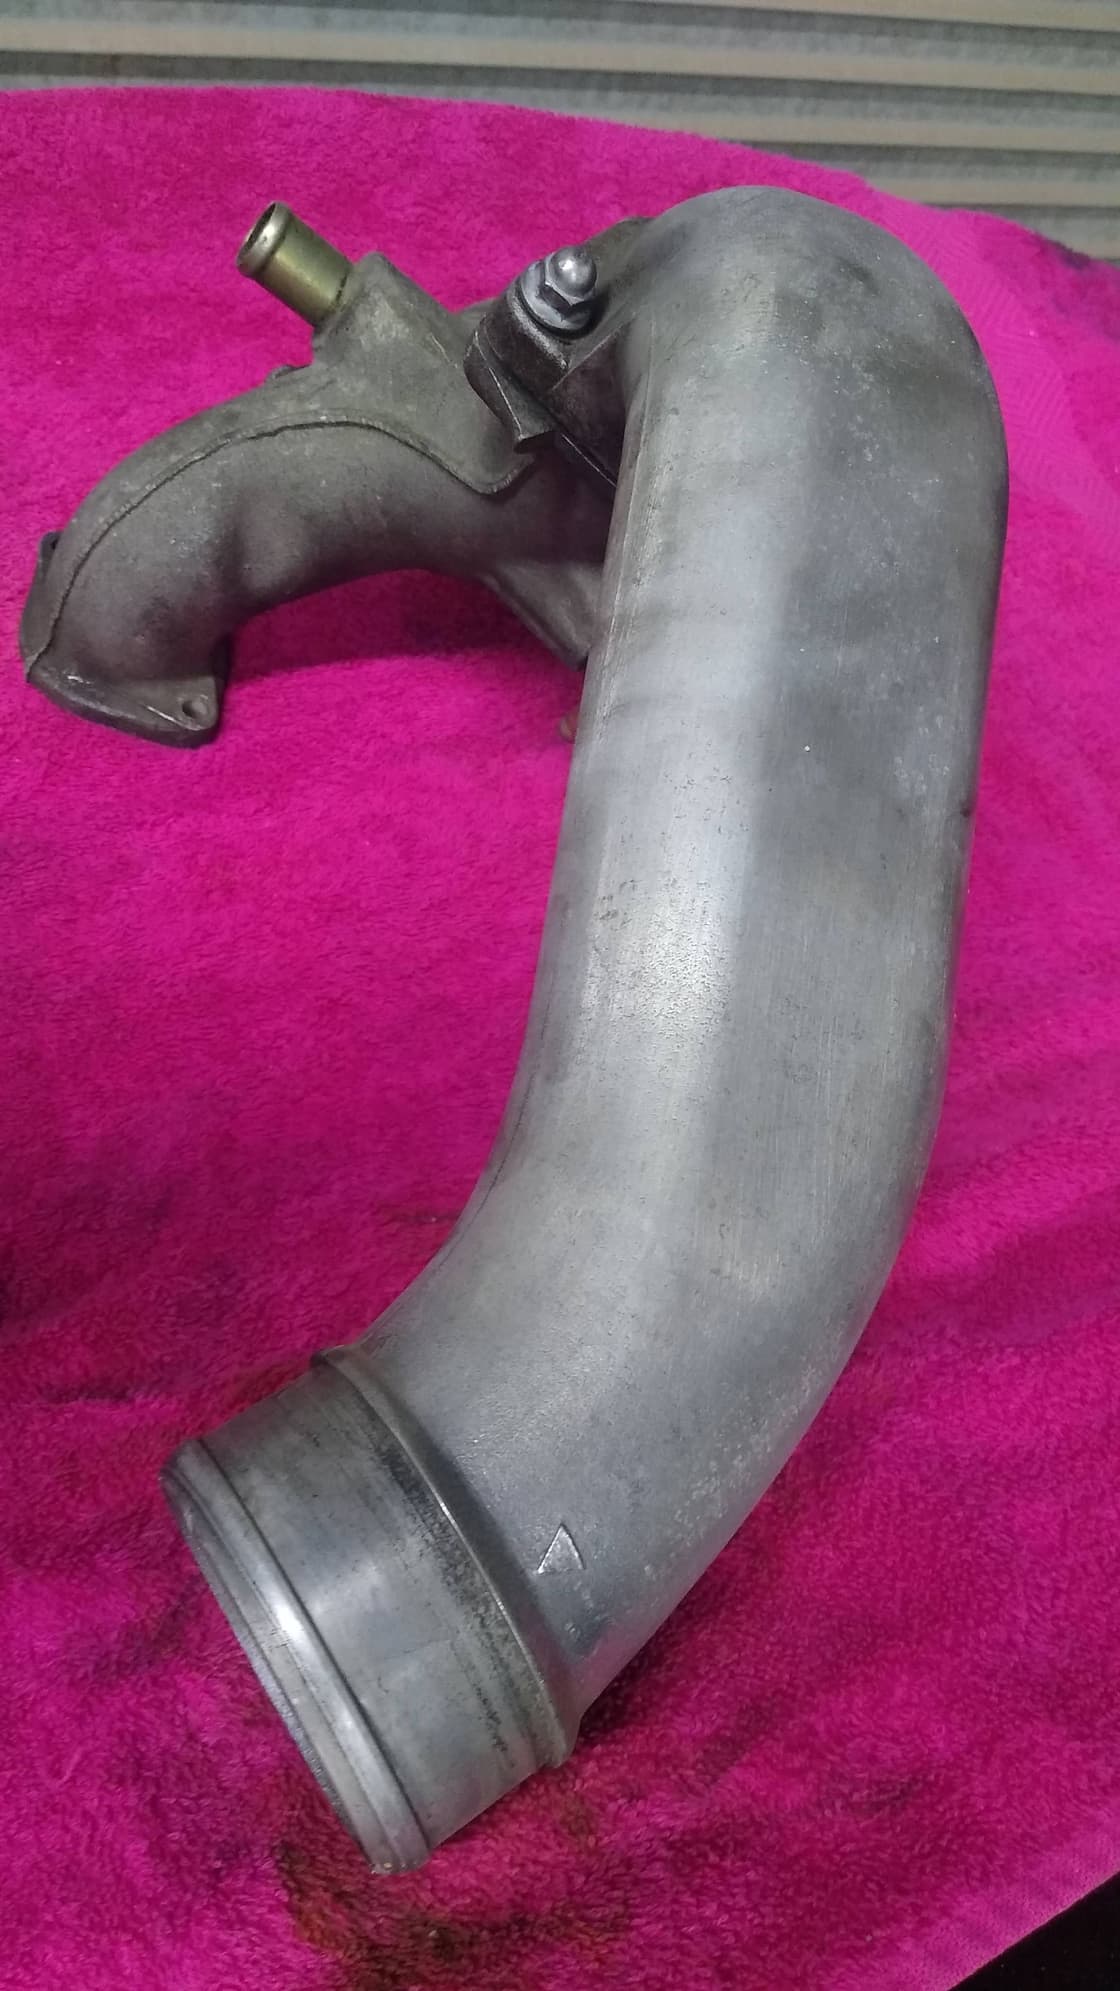 Engine - Intake/Fuel - 99 Spec Y-Pipe with Actuator and Crossover Pipe - TWO available - Used - 1993 to 2002 Mazda RX-7 - Dawsonville, GA 30534, United States